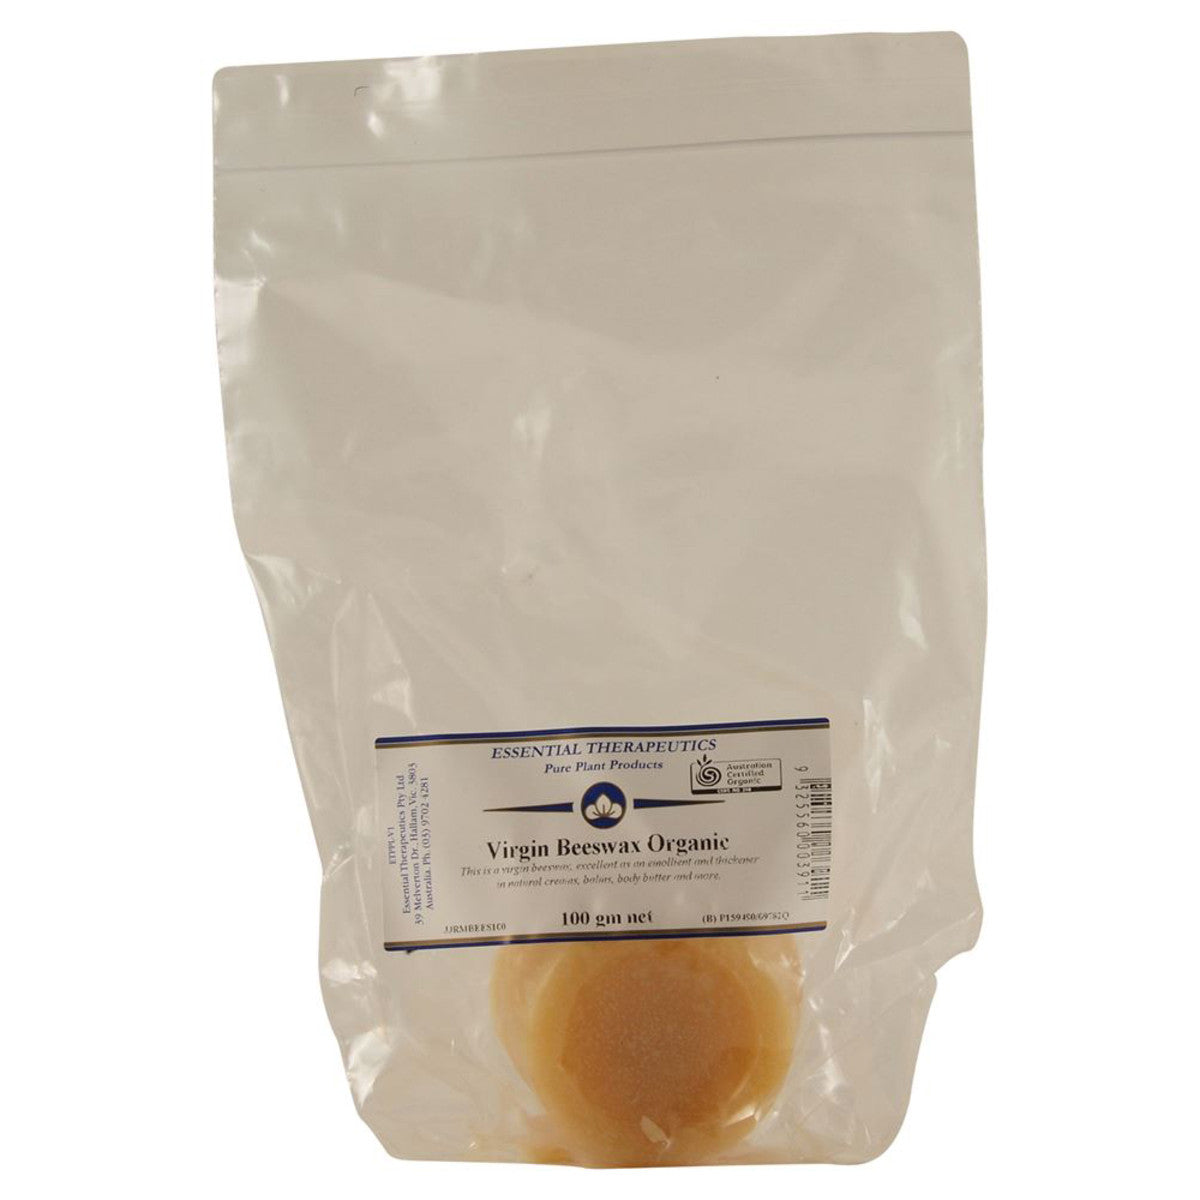 Essential Therapeutic - Beeswax Organic Virgin 100g